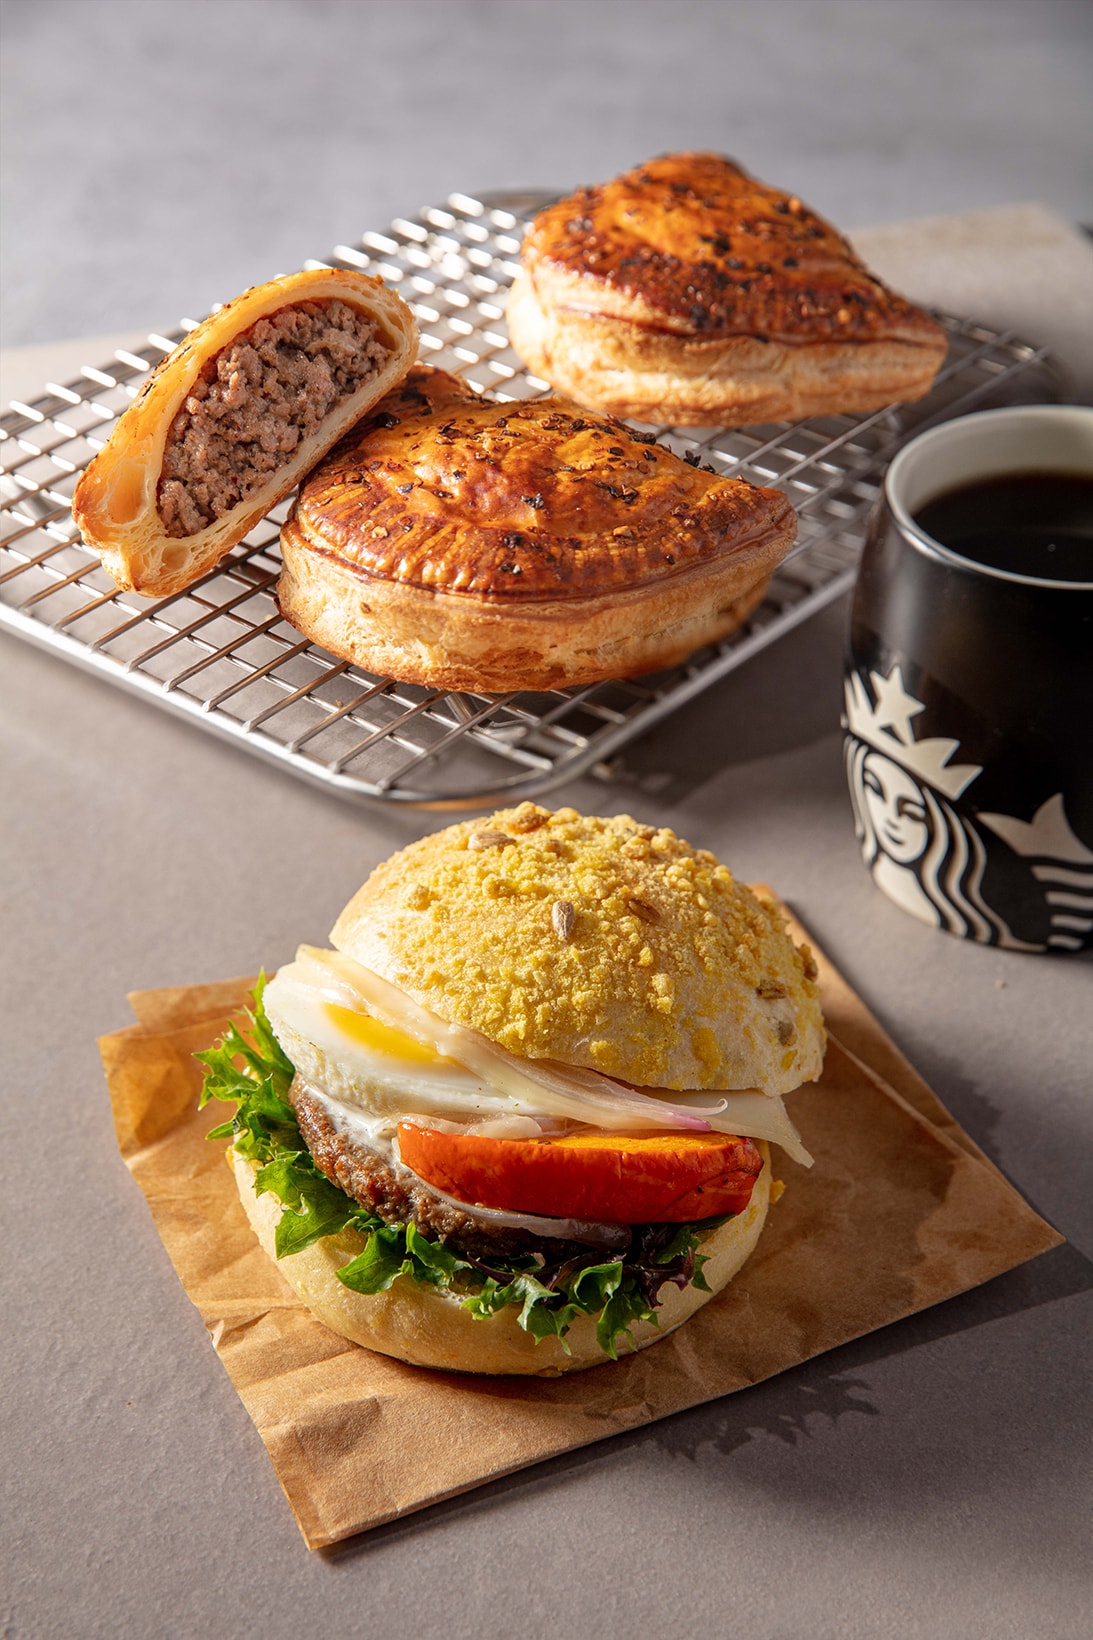 starbucks asia hong kong singapore plant based vegan coffee impossible meat pastries sandwiches wraps pies